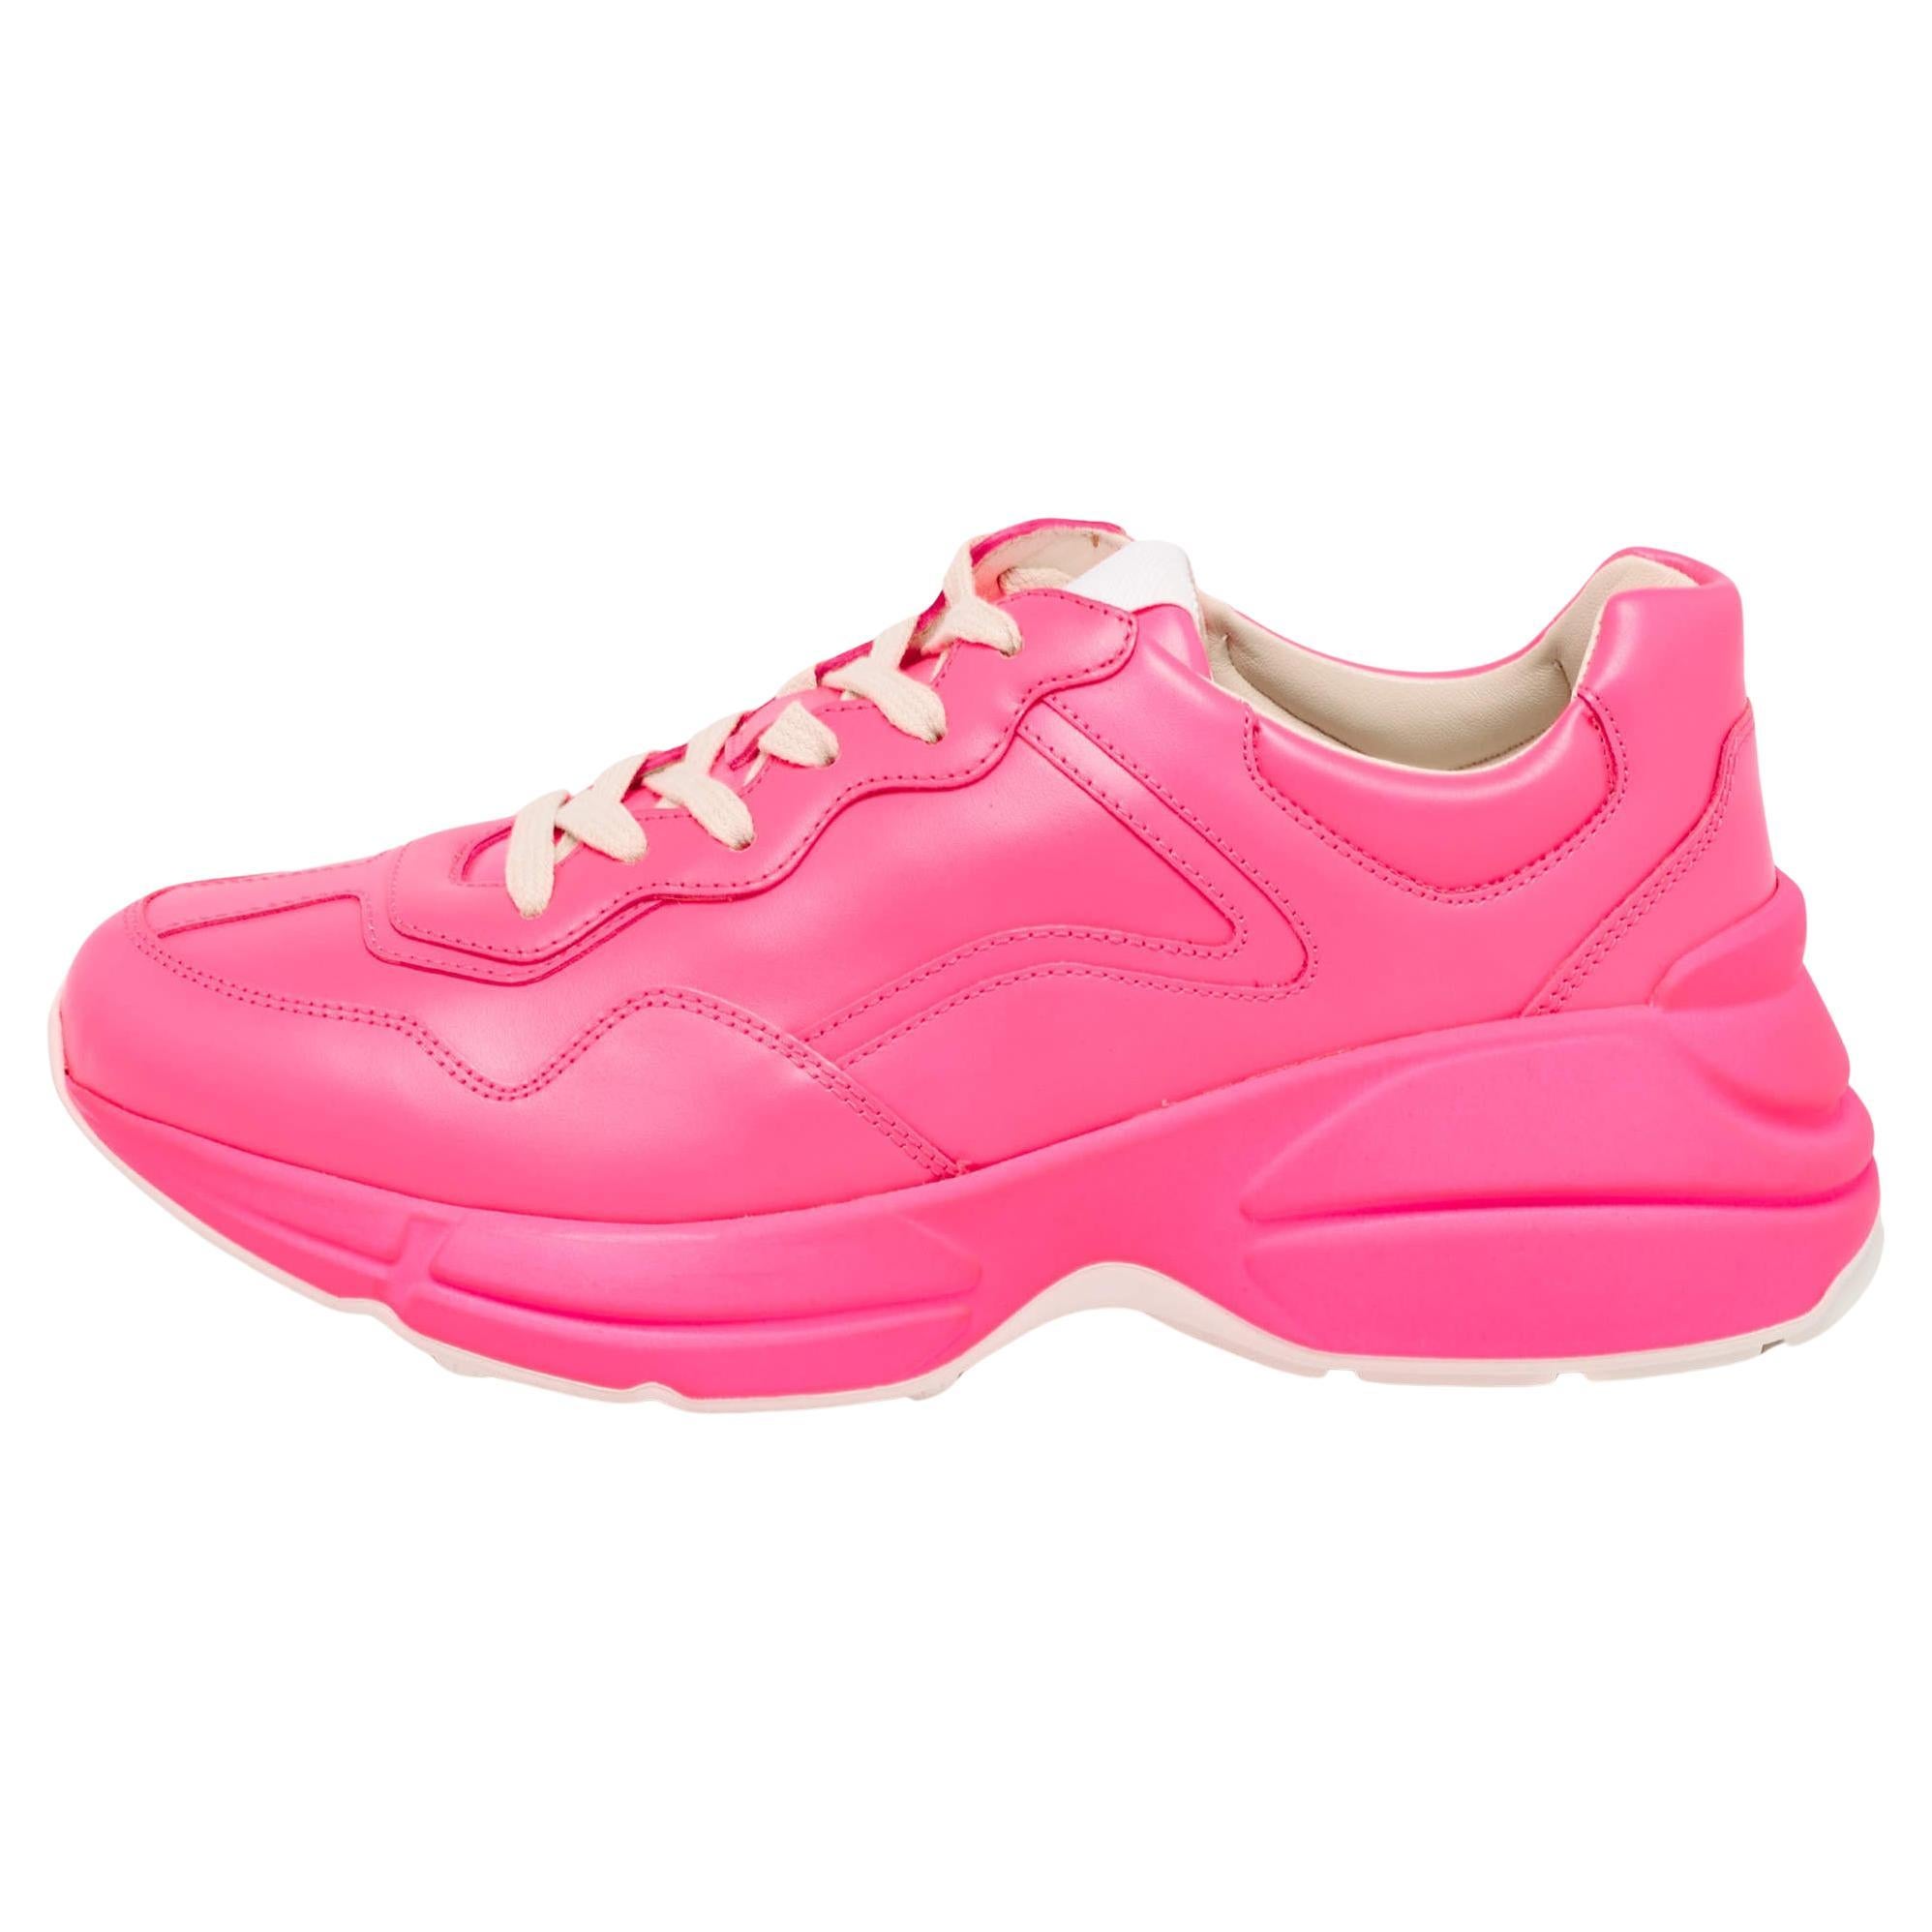 Gucci Neon Pink Leather Rhyton Sneakers Size 39 For Sale